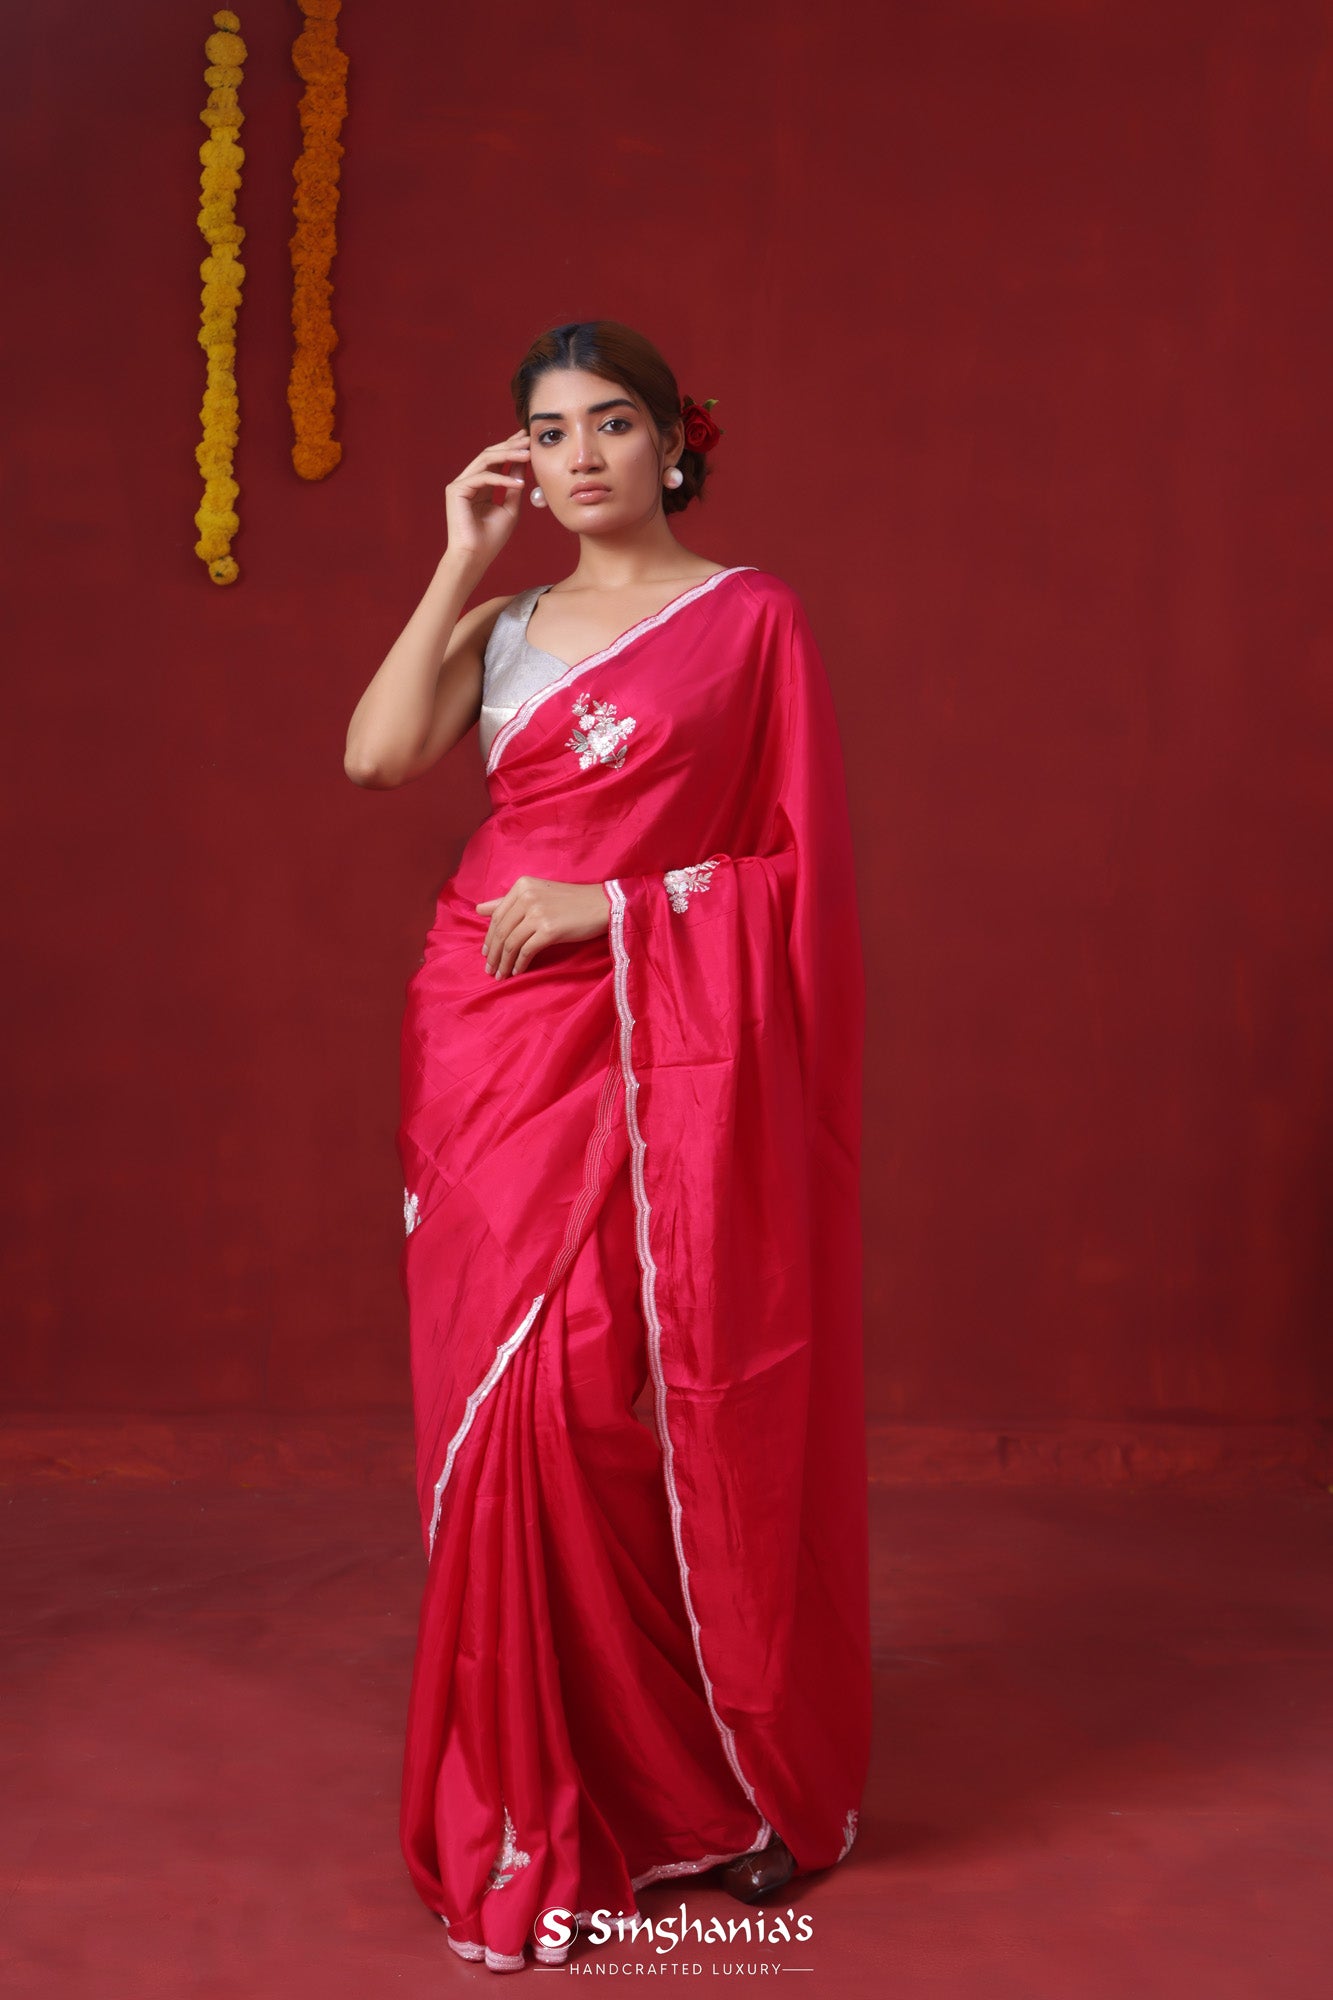 Imperial Red Modal Satin Saree With Hand Embroidery